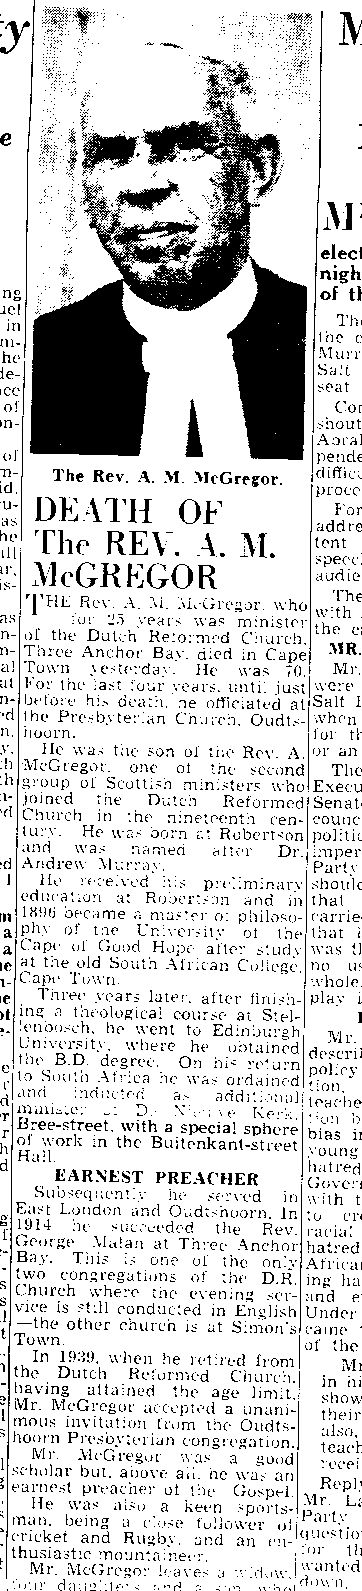 Report of the death of Rev Andrew McGregor (Jnr) in the Cape Times, 21 September 1943